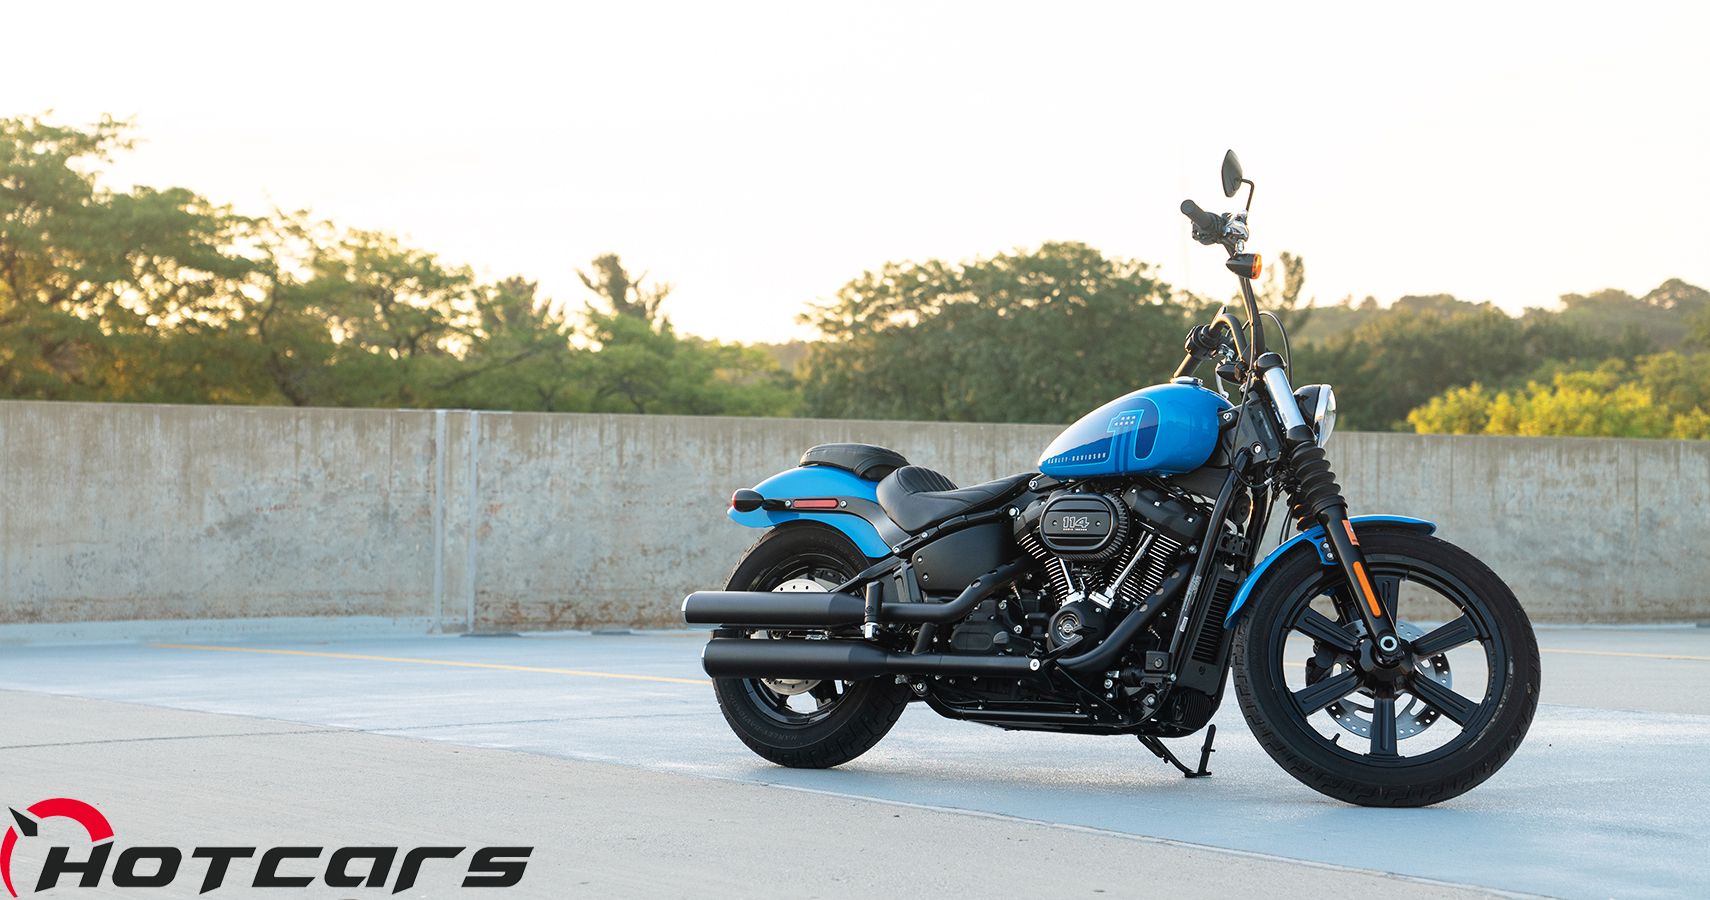 2022 HarleyDavidson Street Bob 114 Review This Is Pure, Uncut